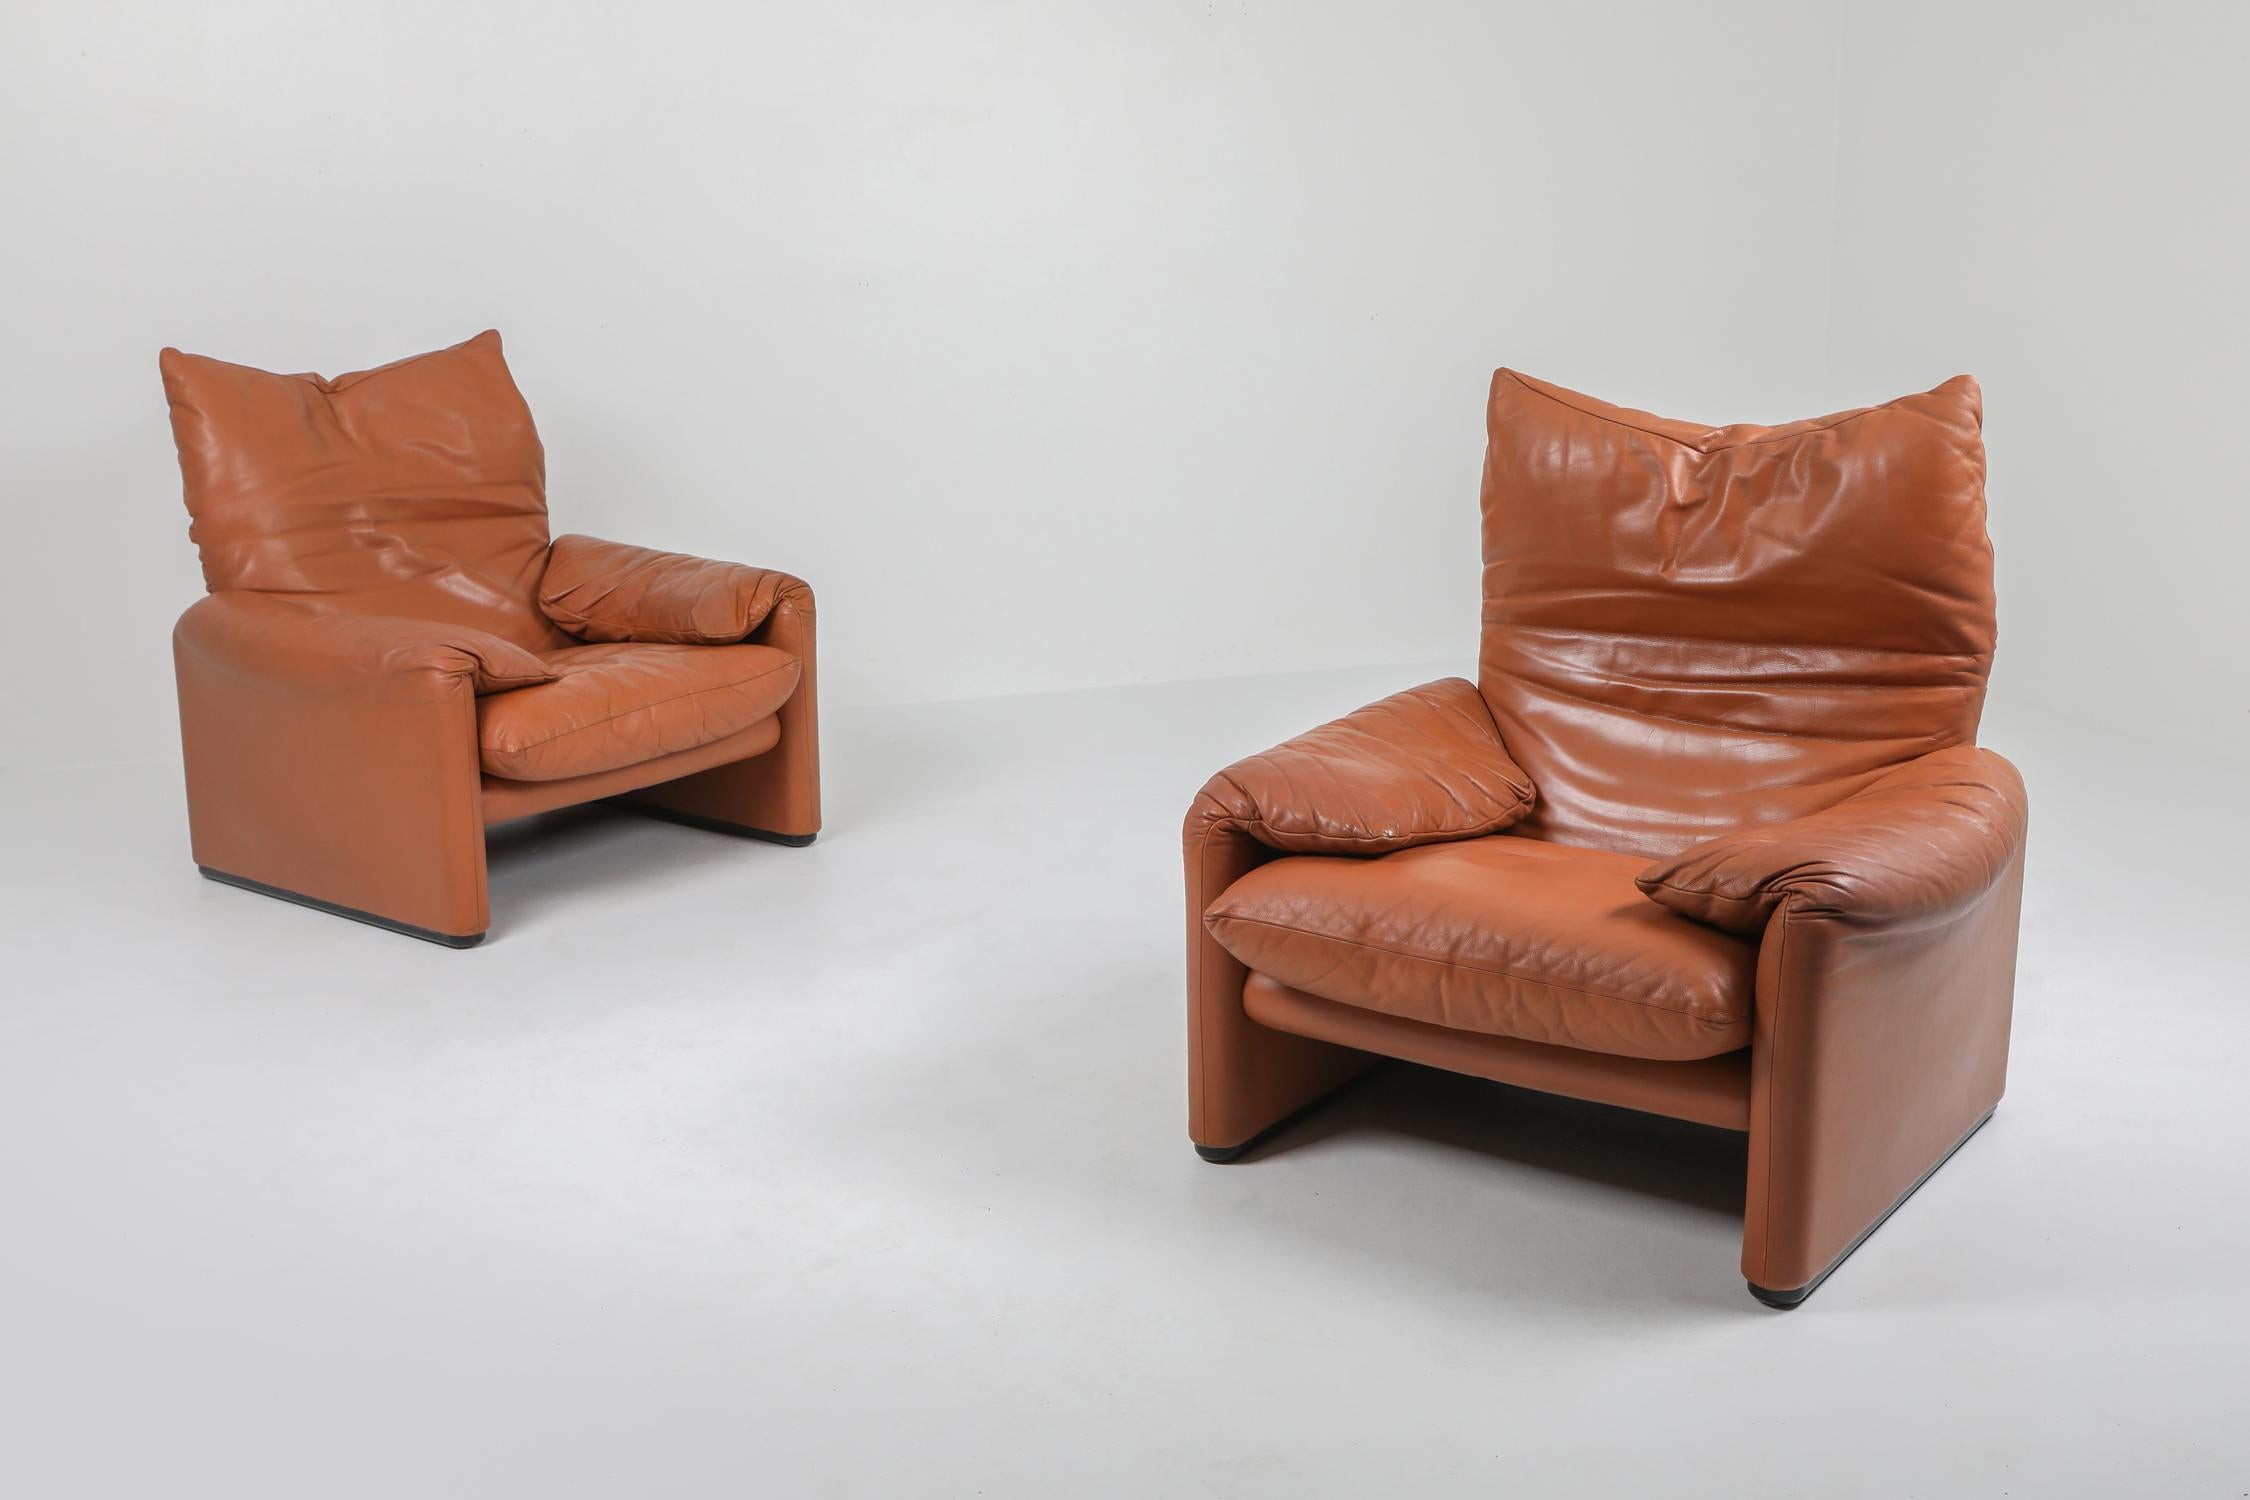 Post-Modern Maralunga Cognac Chairs by Vico Magistretti for Cassina, 1974